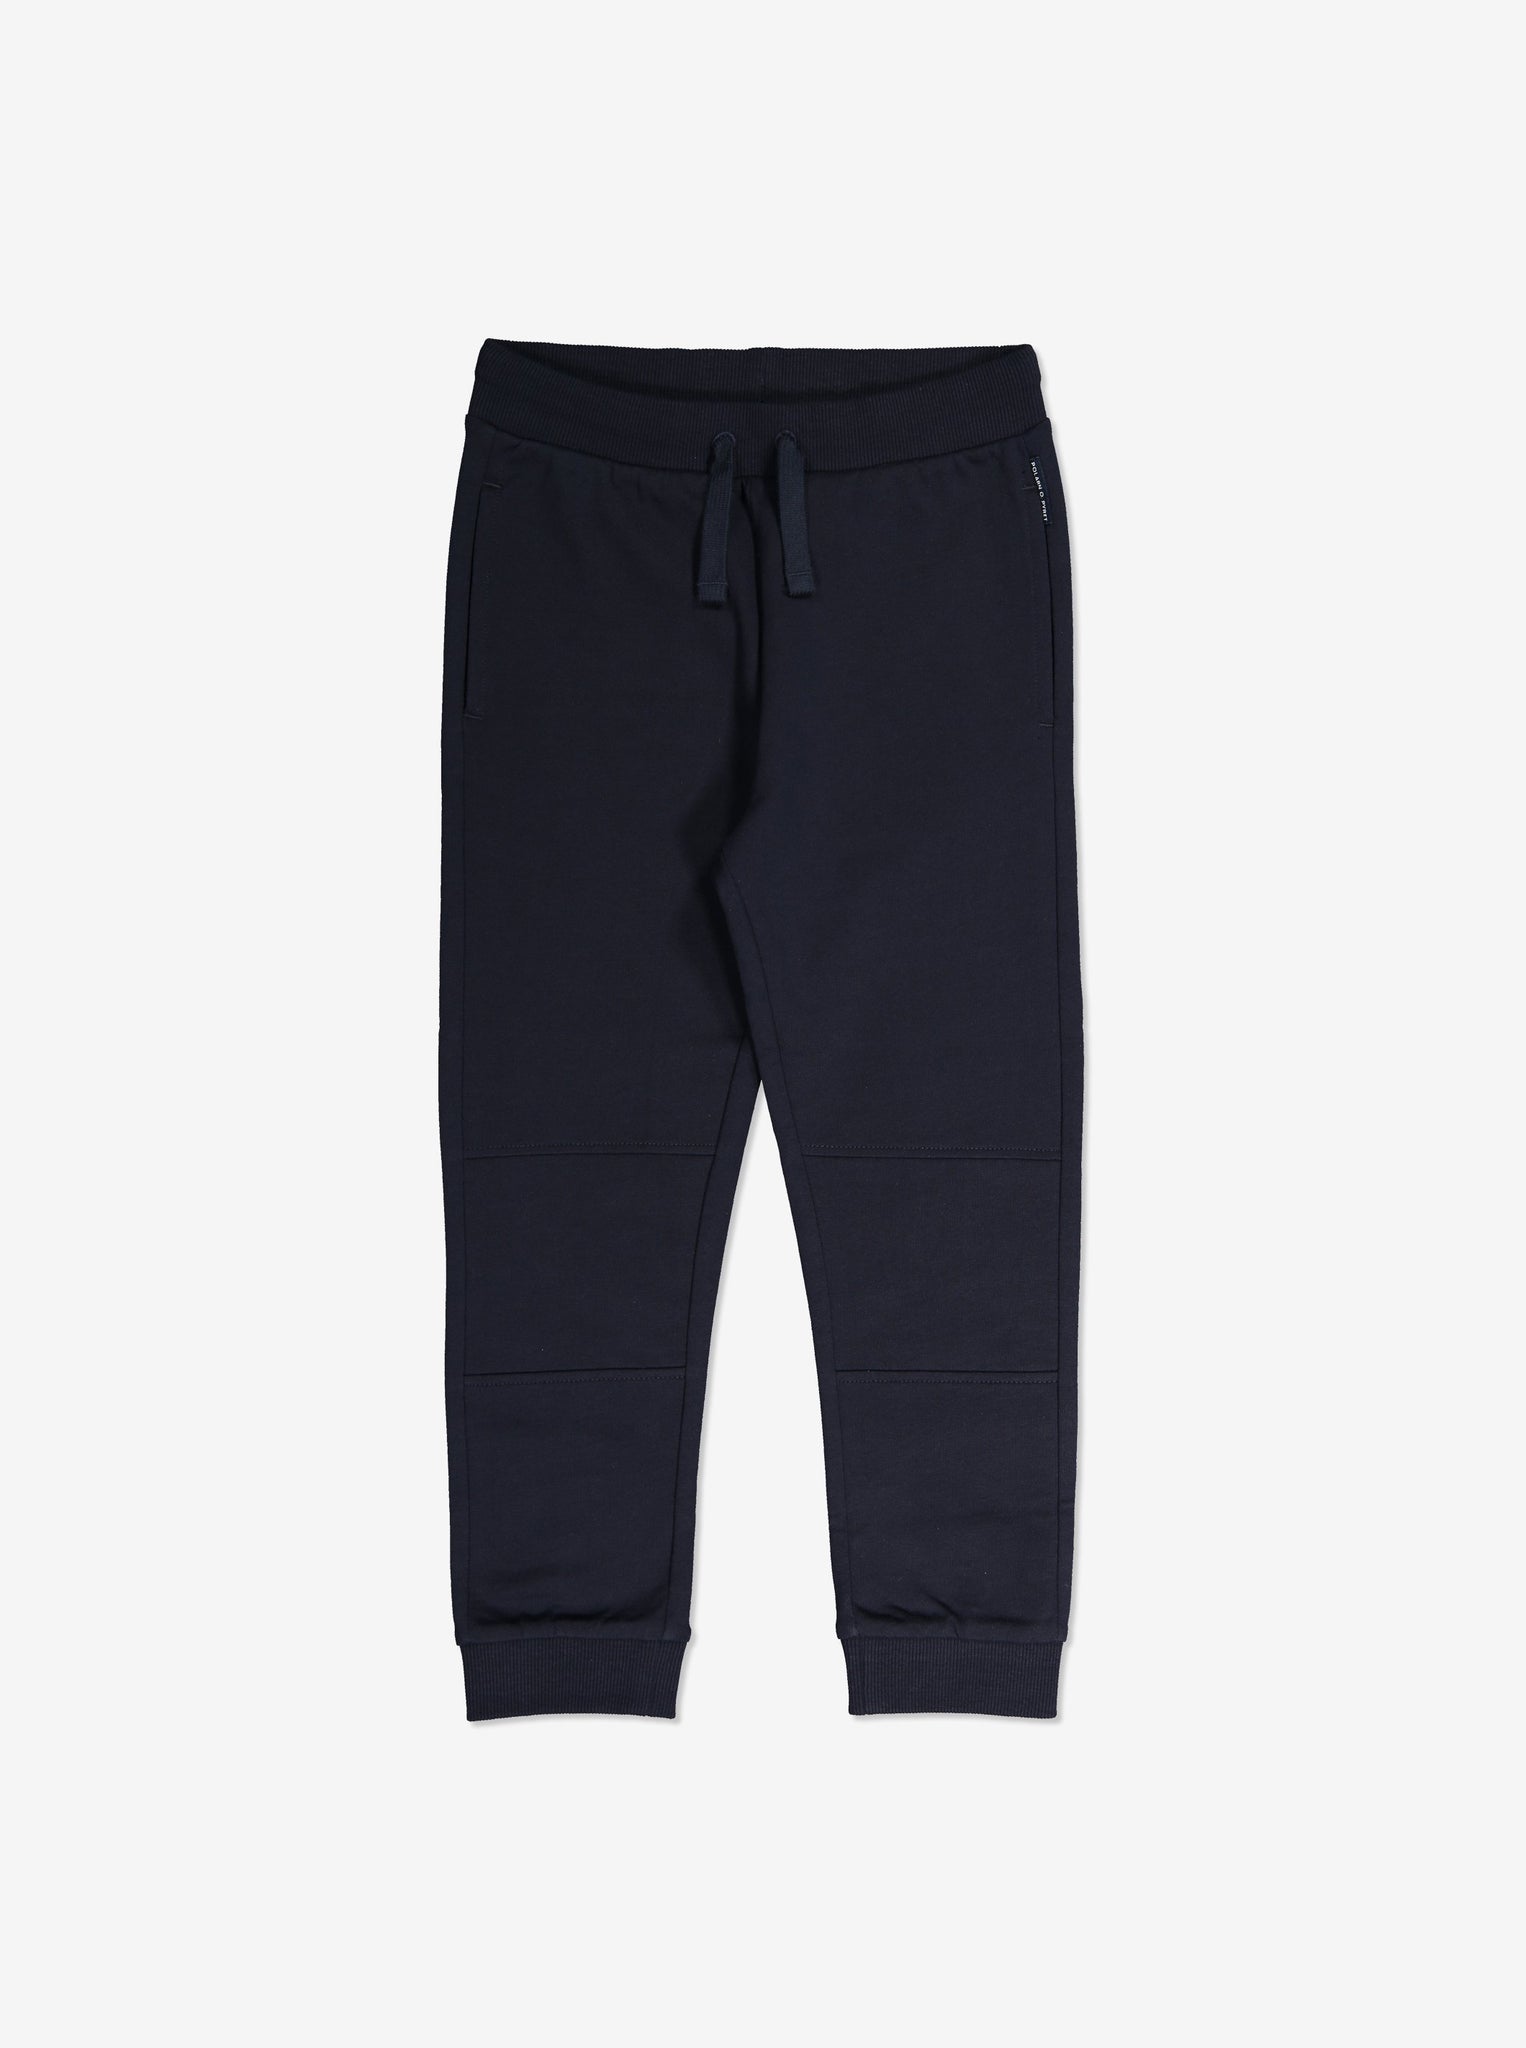 Navy Kids joggers, sustainable organic cotton, durable and comfortable, polarn o. pyret quality